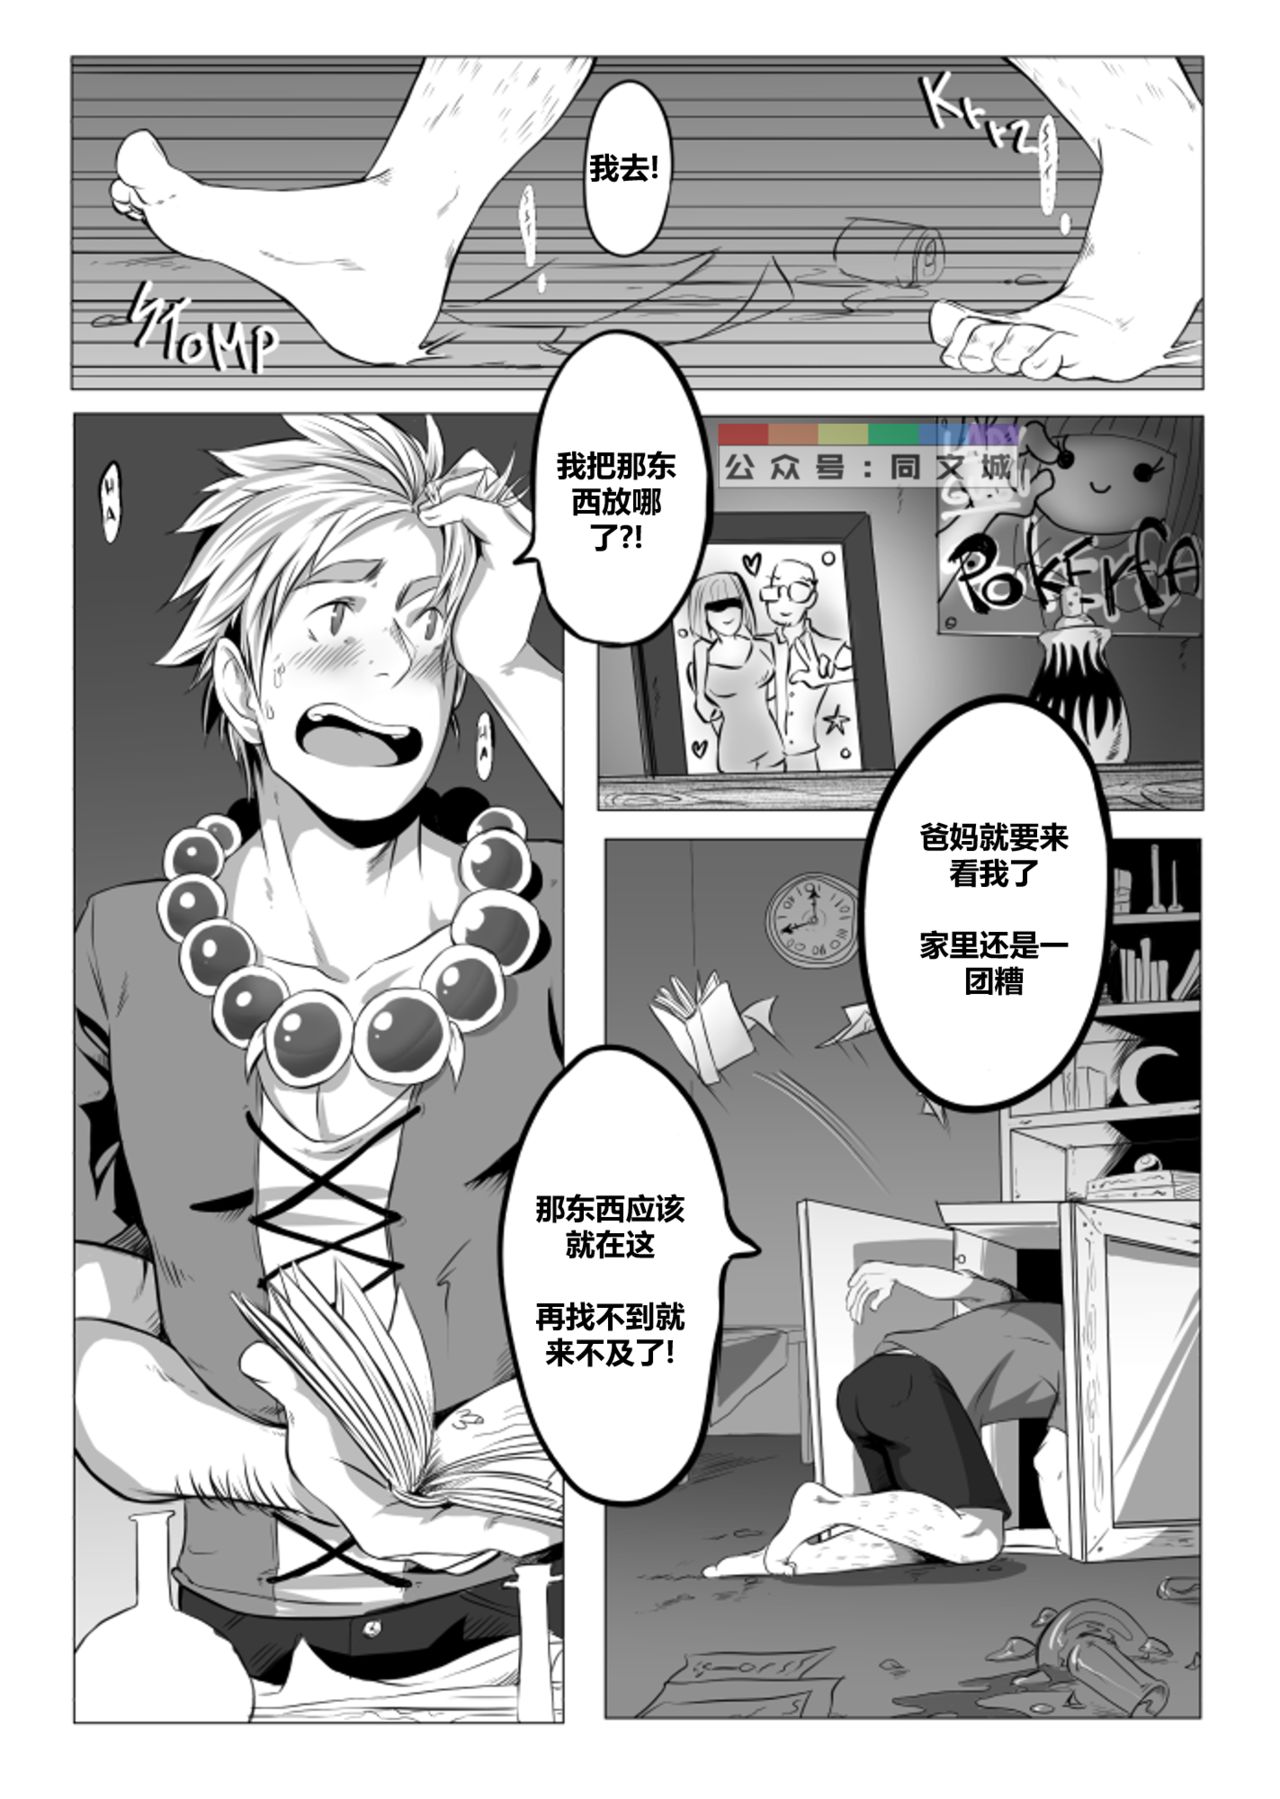 Jasdavi – Keep it Clean!（Chinese） page 3 full